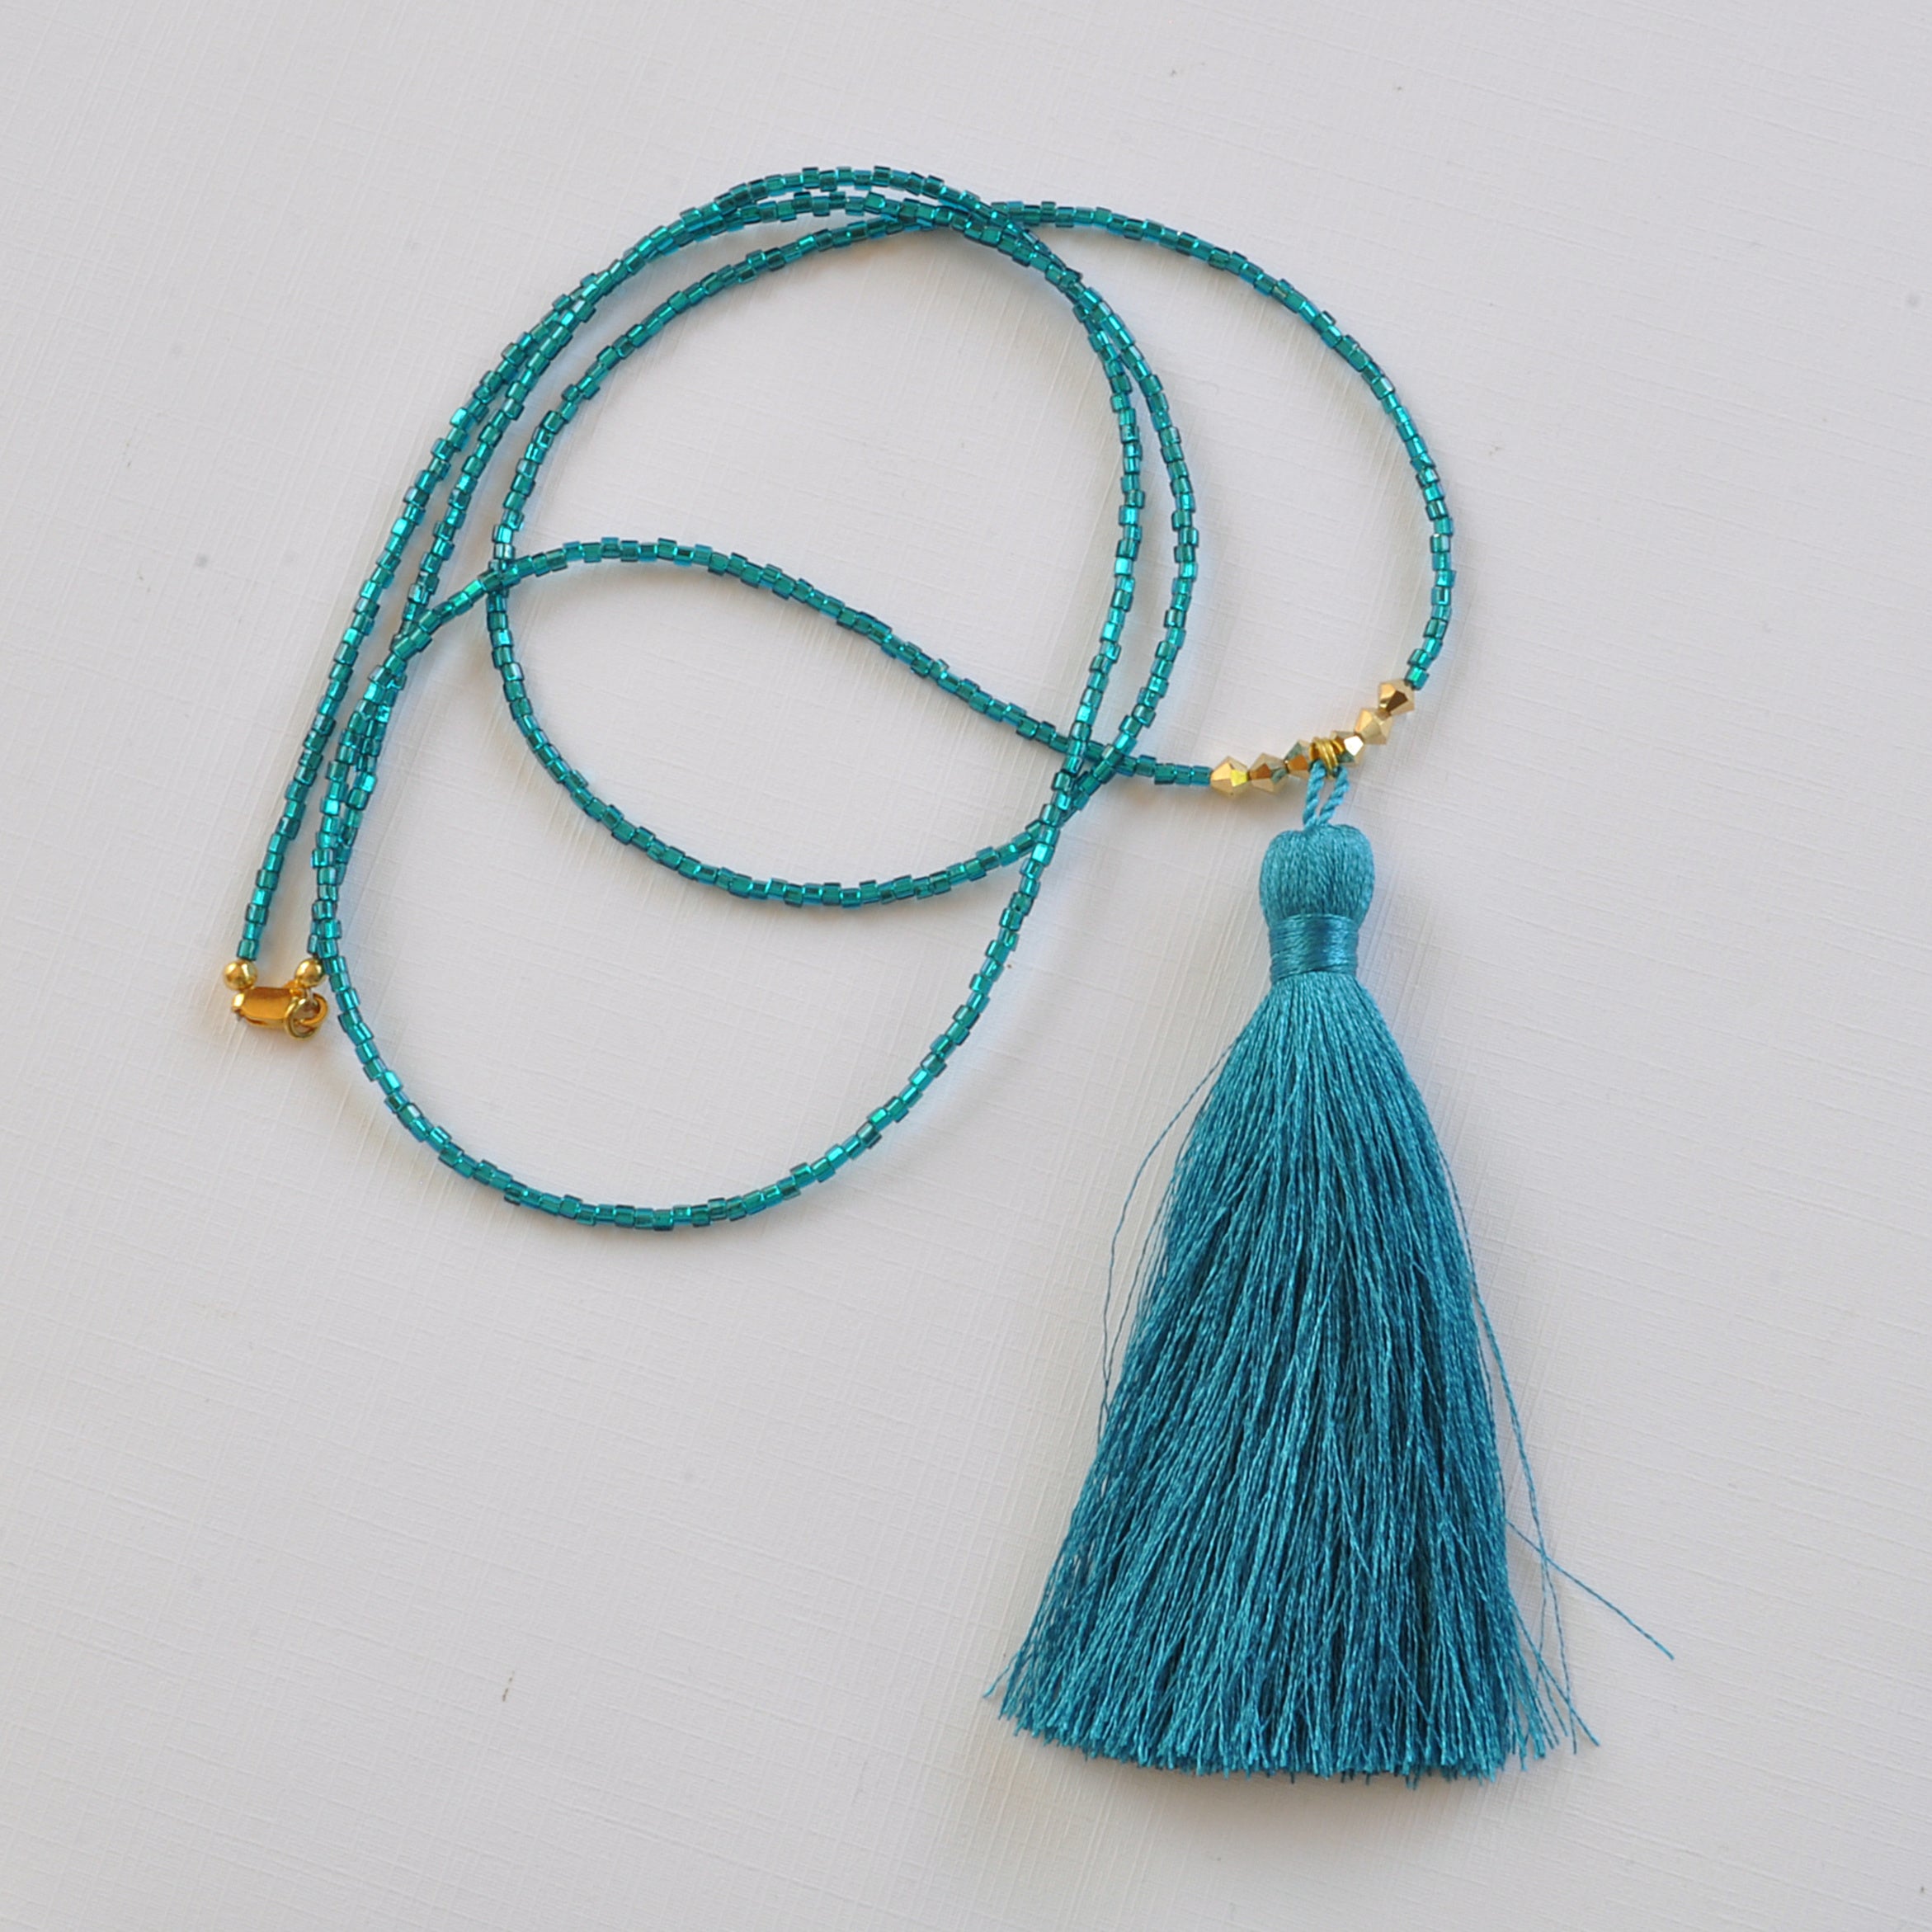 Most Charming Boho Beaded necklaces for an easy-going look | Tassel necklace  boho, Beaded necklace, Long beaded necklace